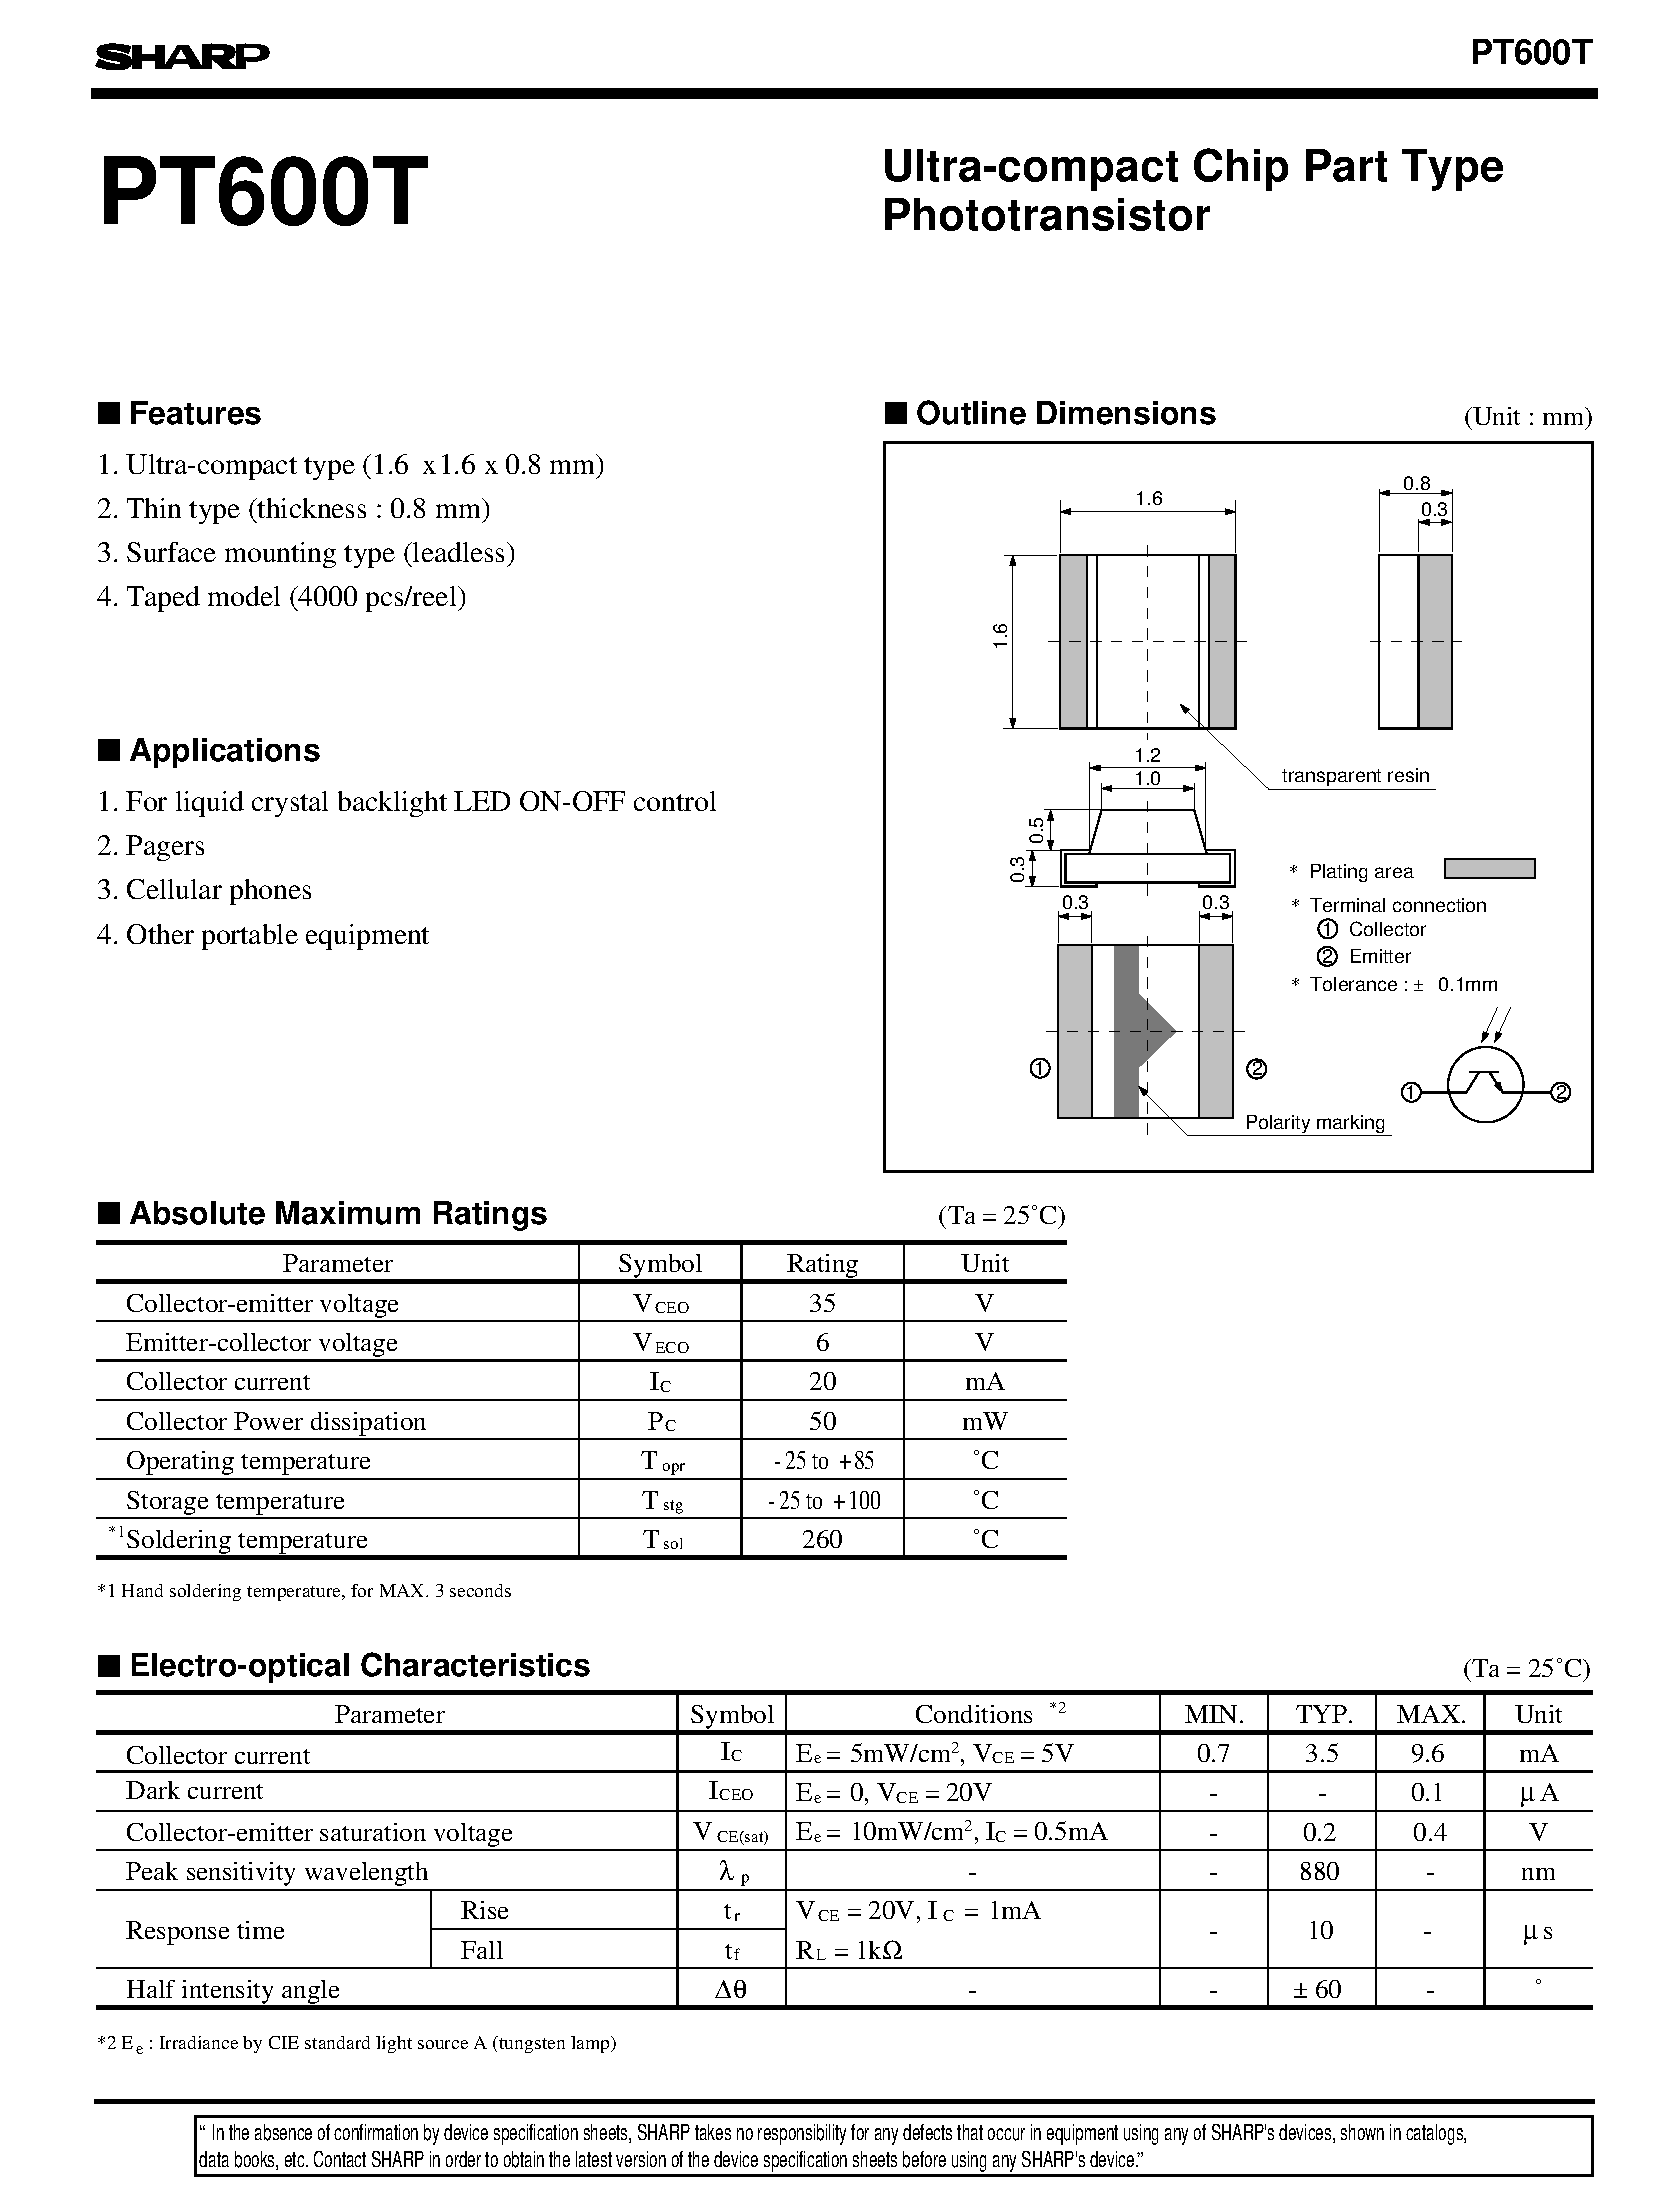 Datasheet PT600T - Ultra-compact Chip Part Type Phototransistor page 1